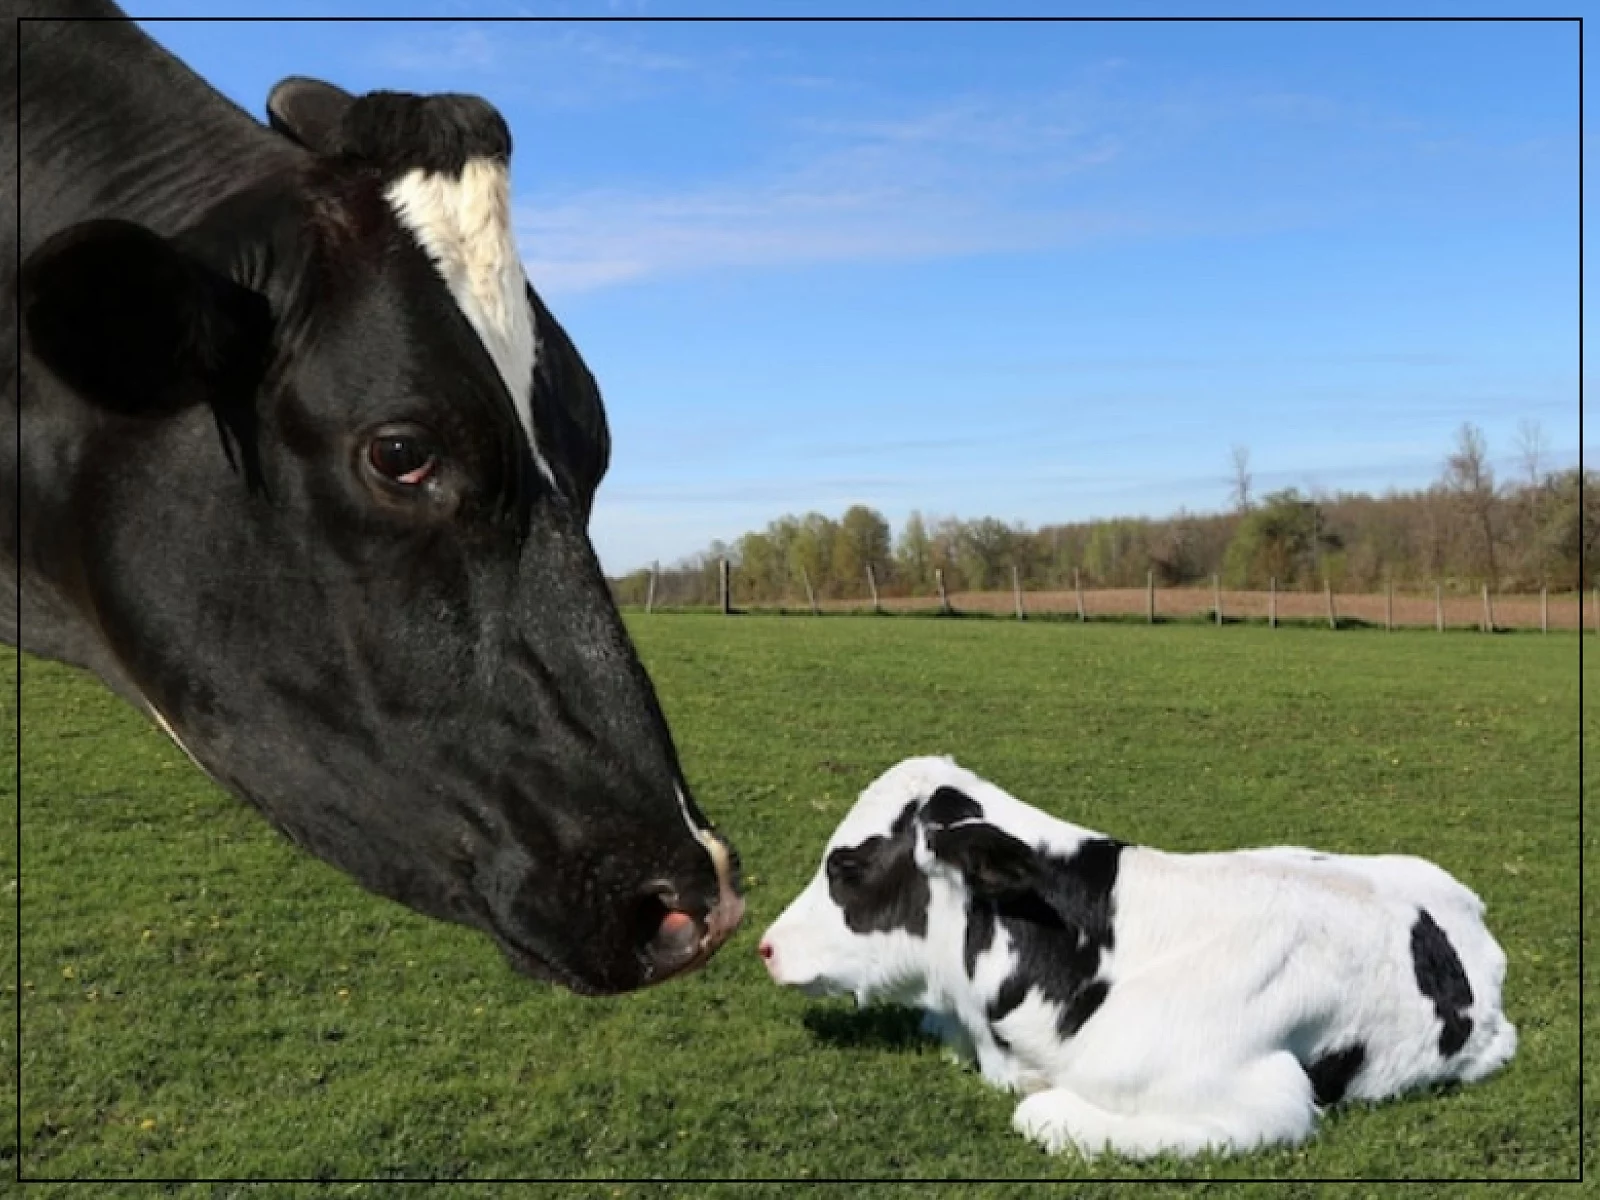 Cow with calf